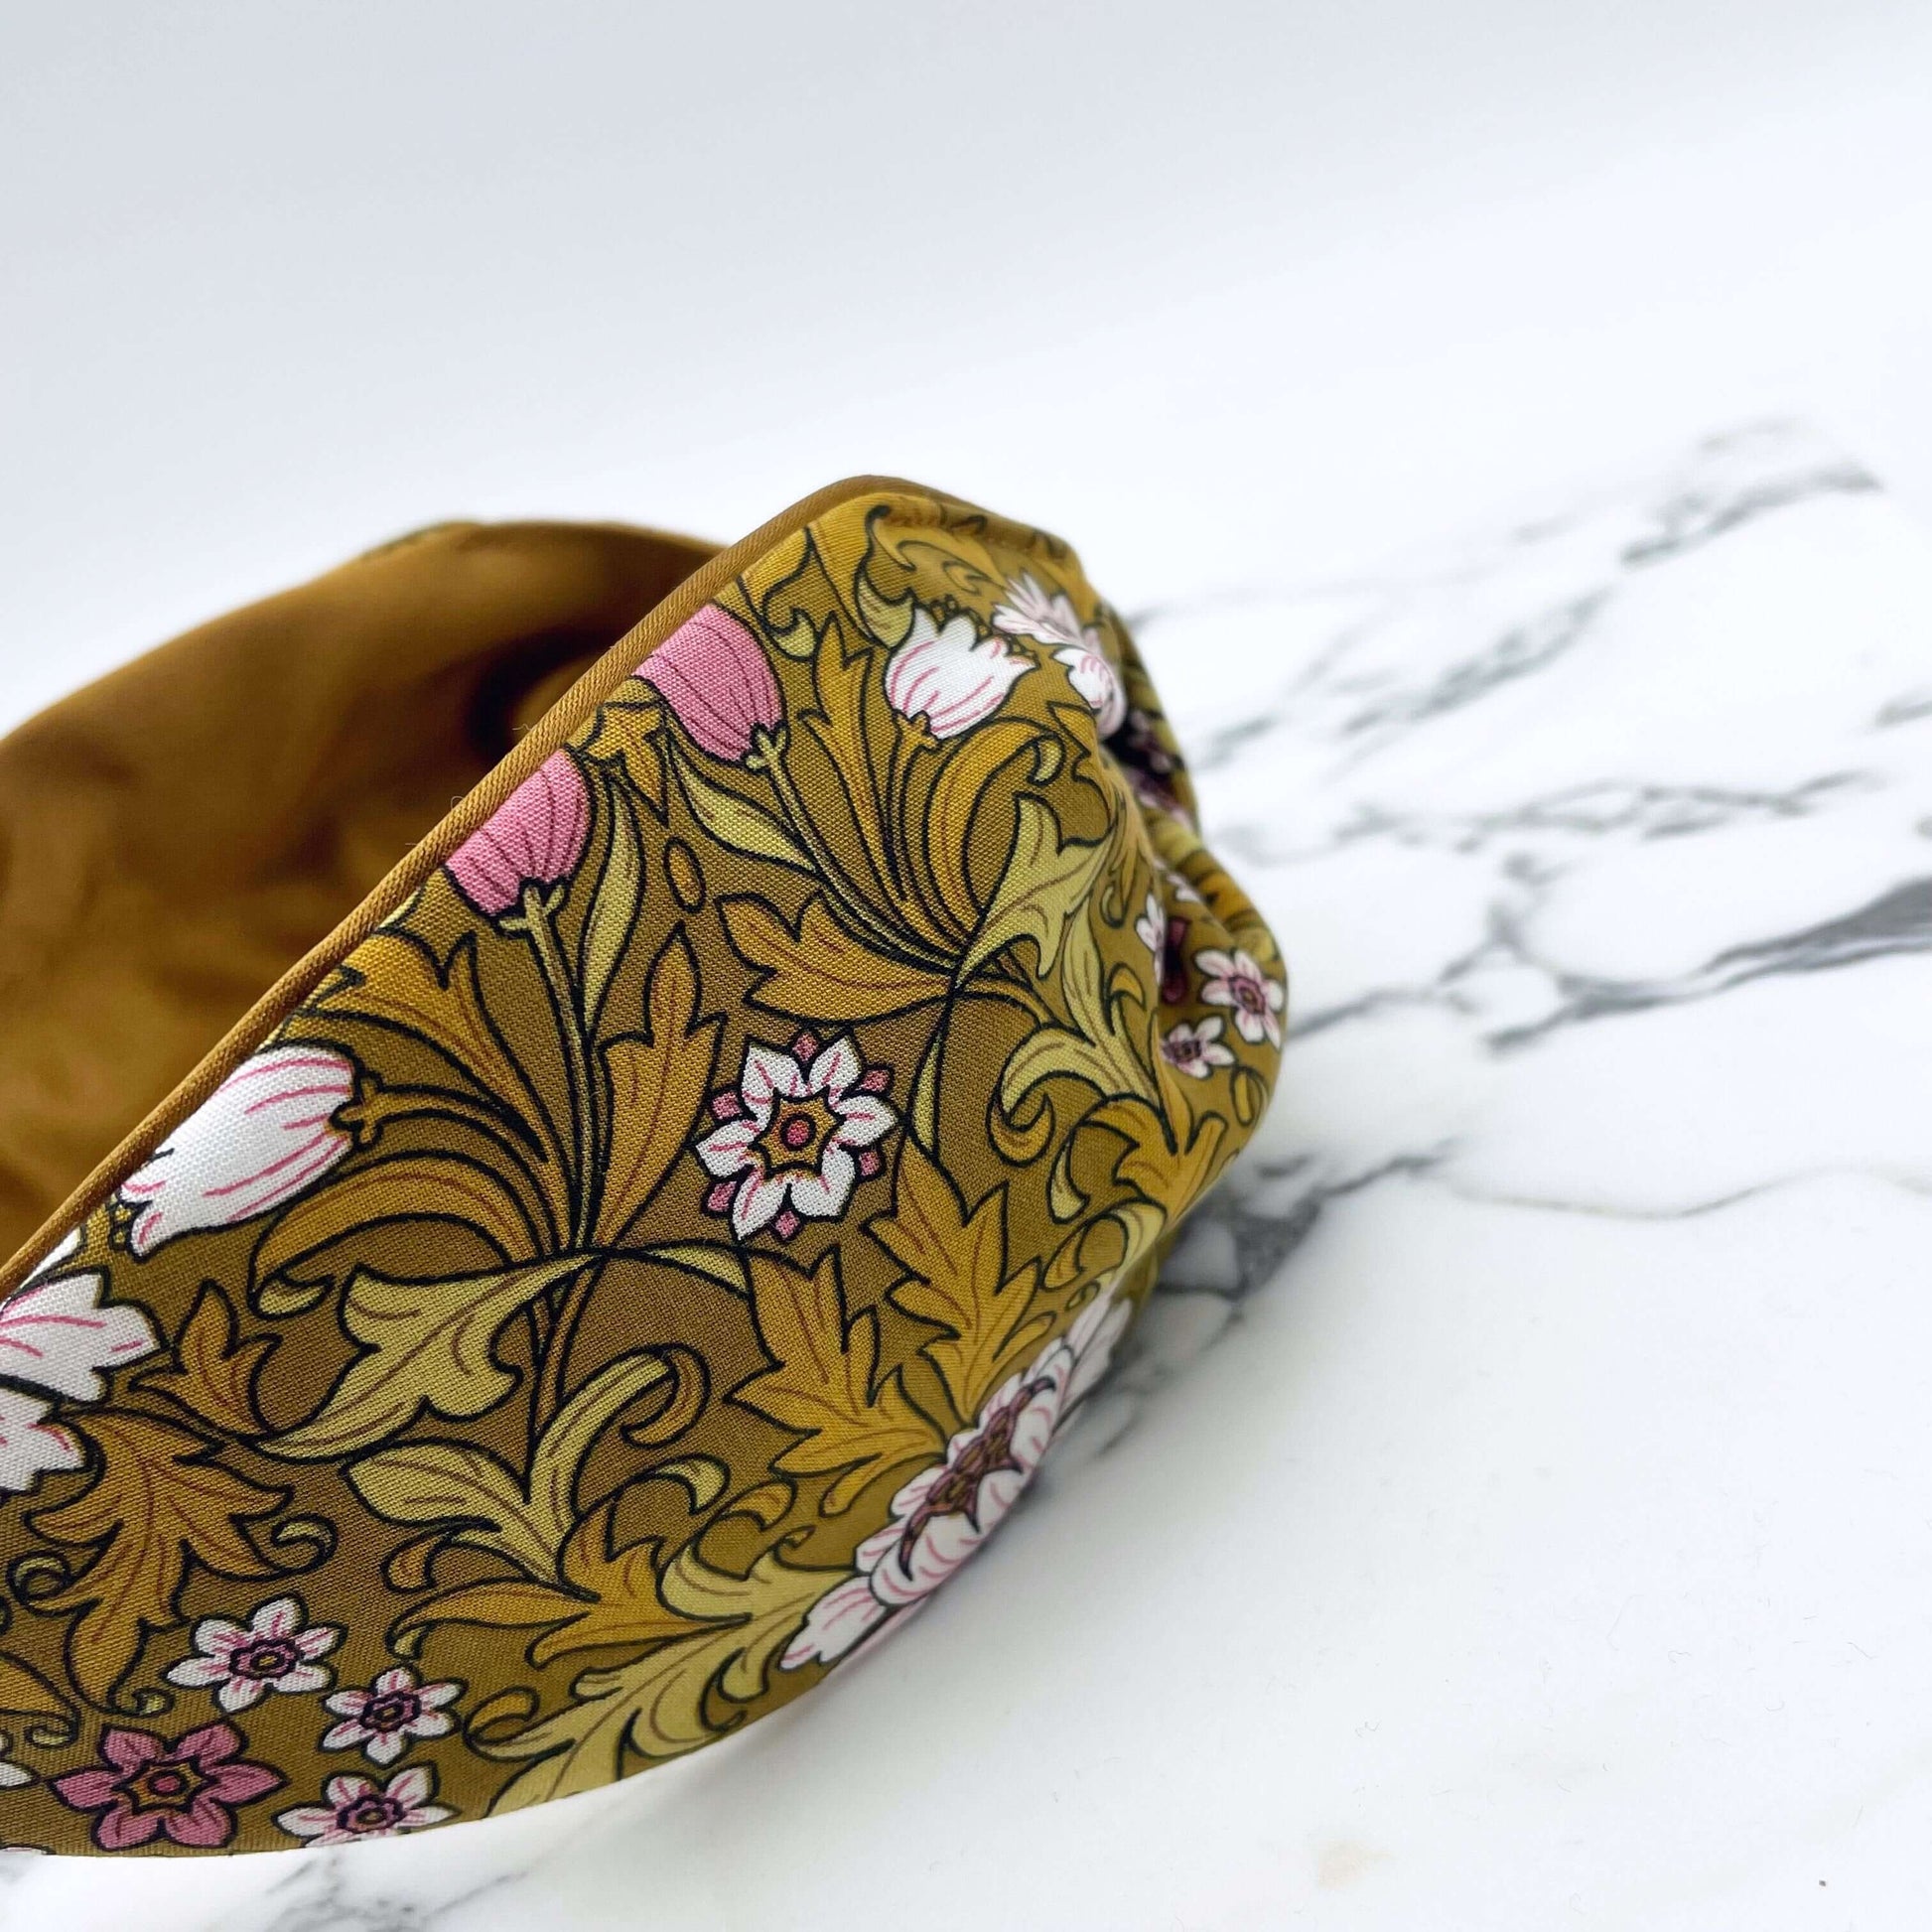 William Morris- Inspired Knot Headband with satin lining in mustard. Flowers and leaves print